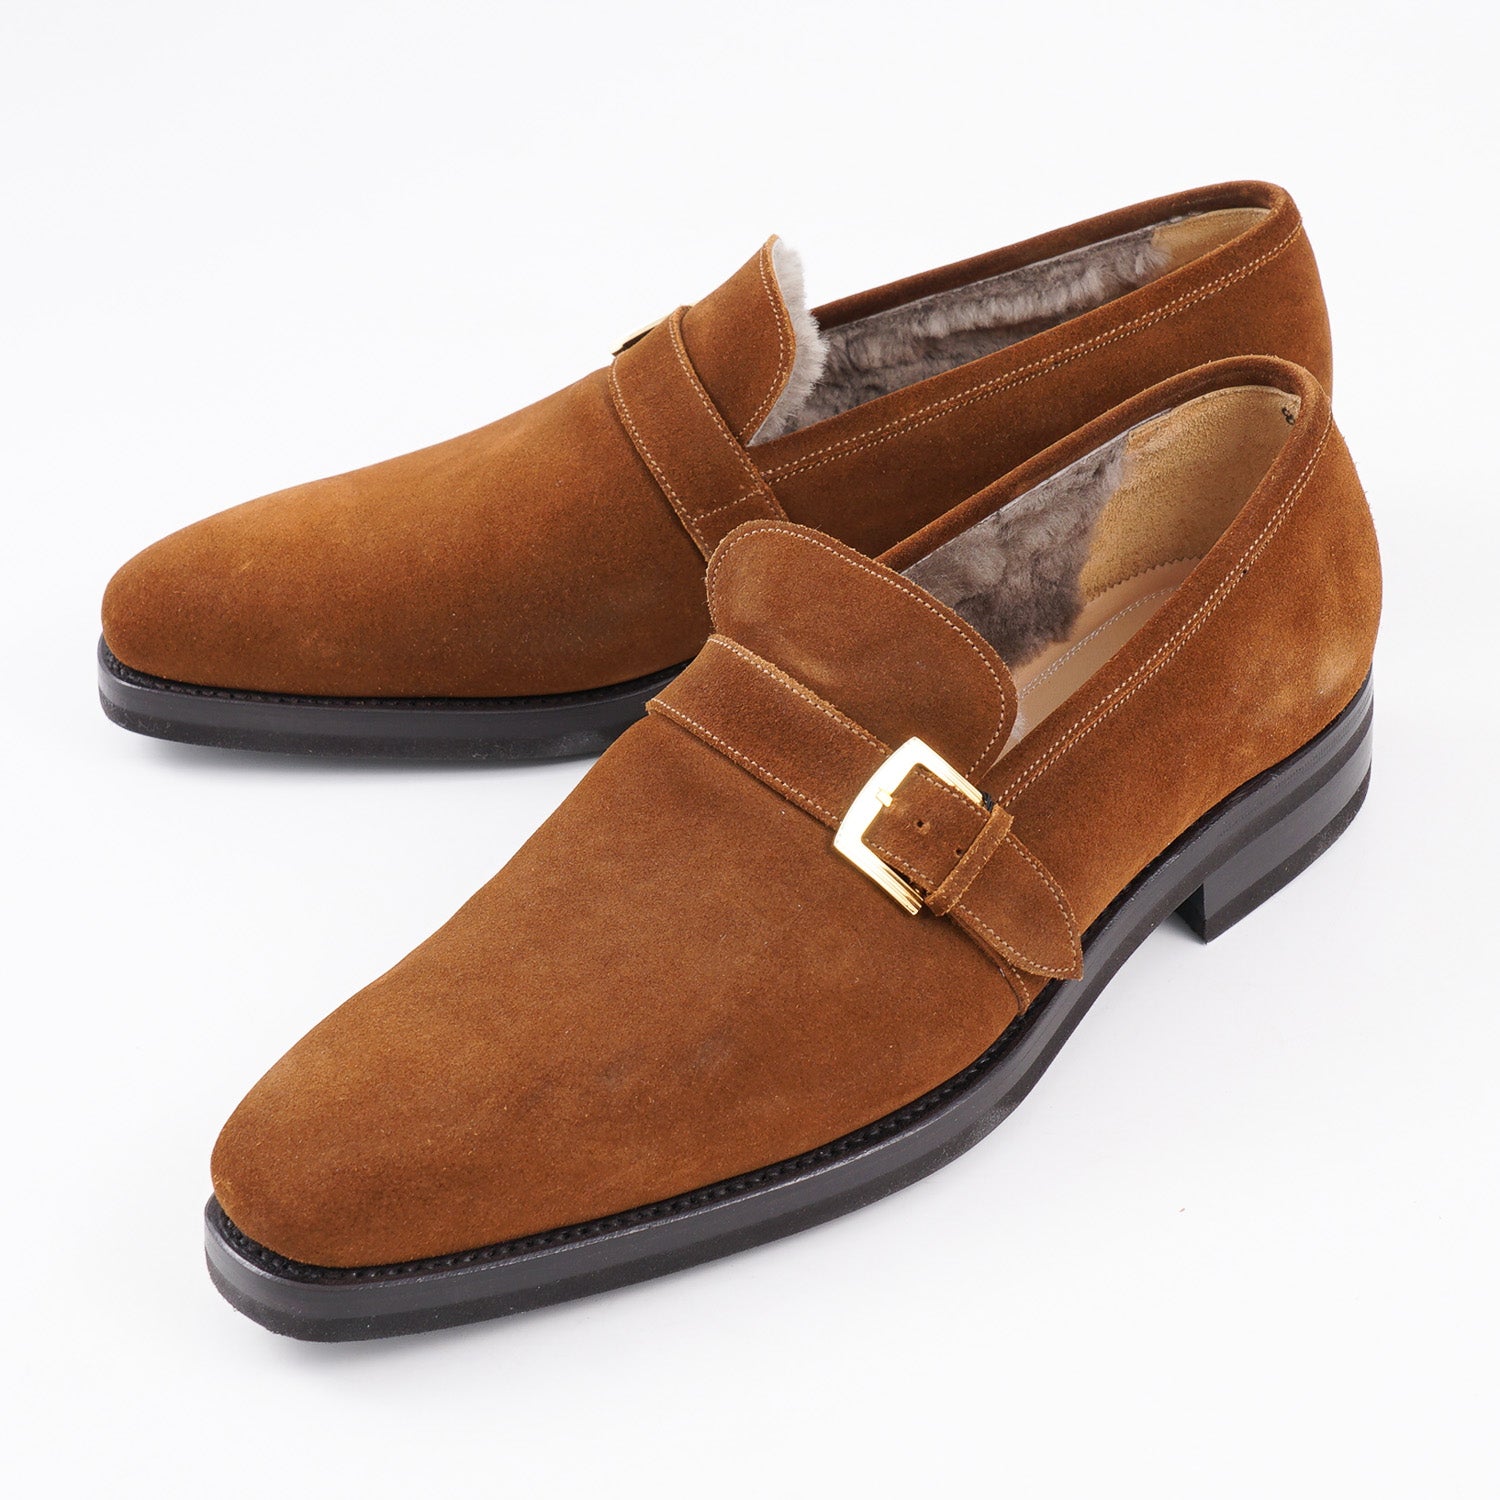 Kiton Shearling-Lined Suede Loafers - Top Shelf Apparel